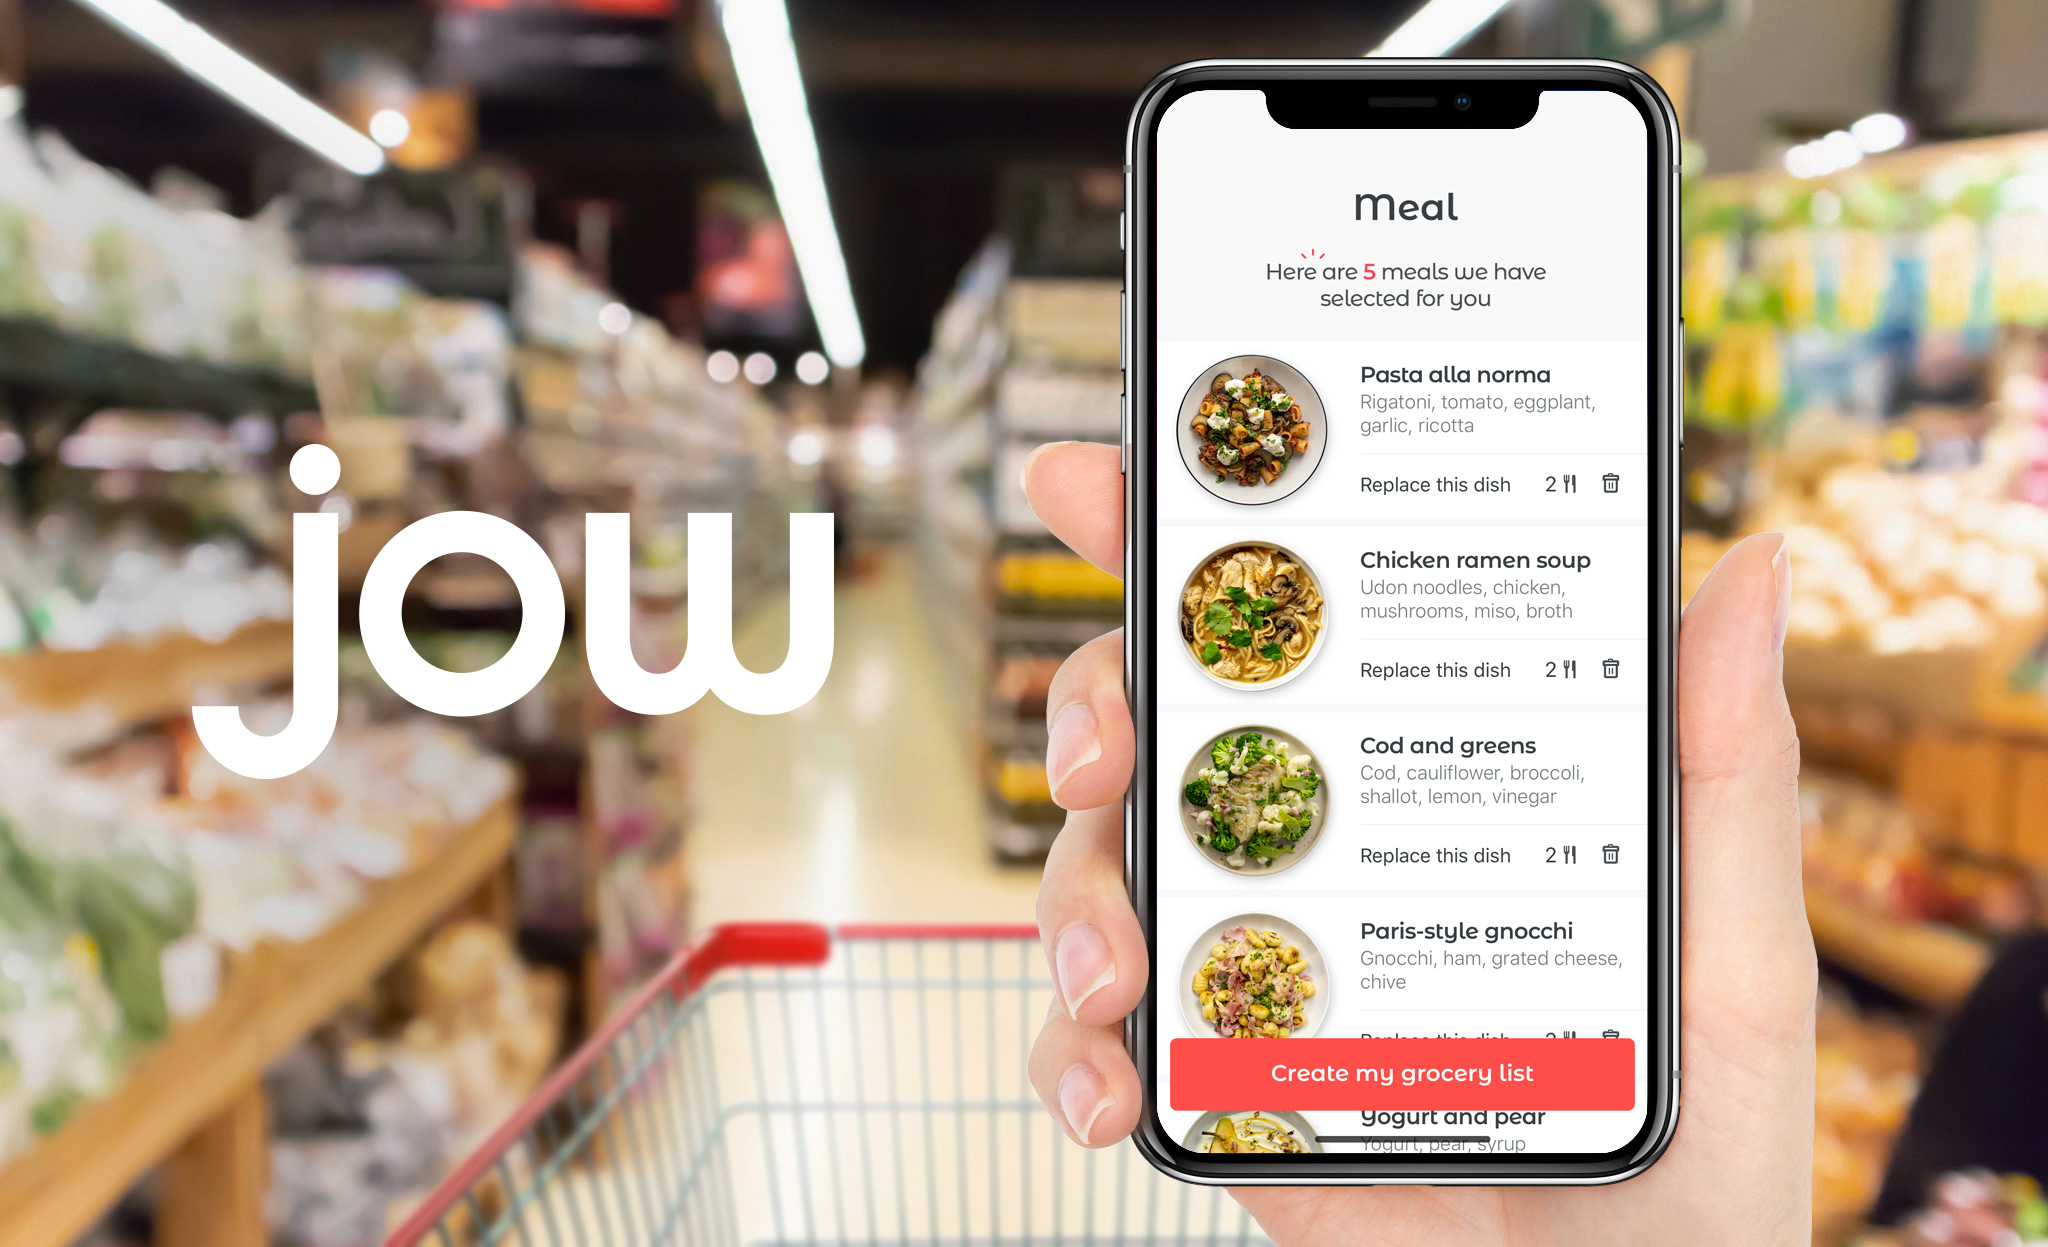 Development of grocery apps: Features and Price